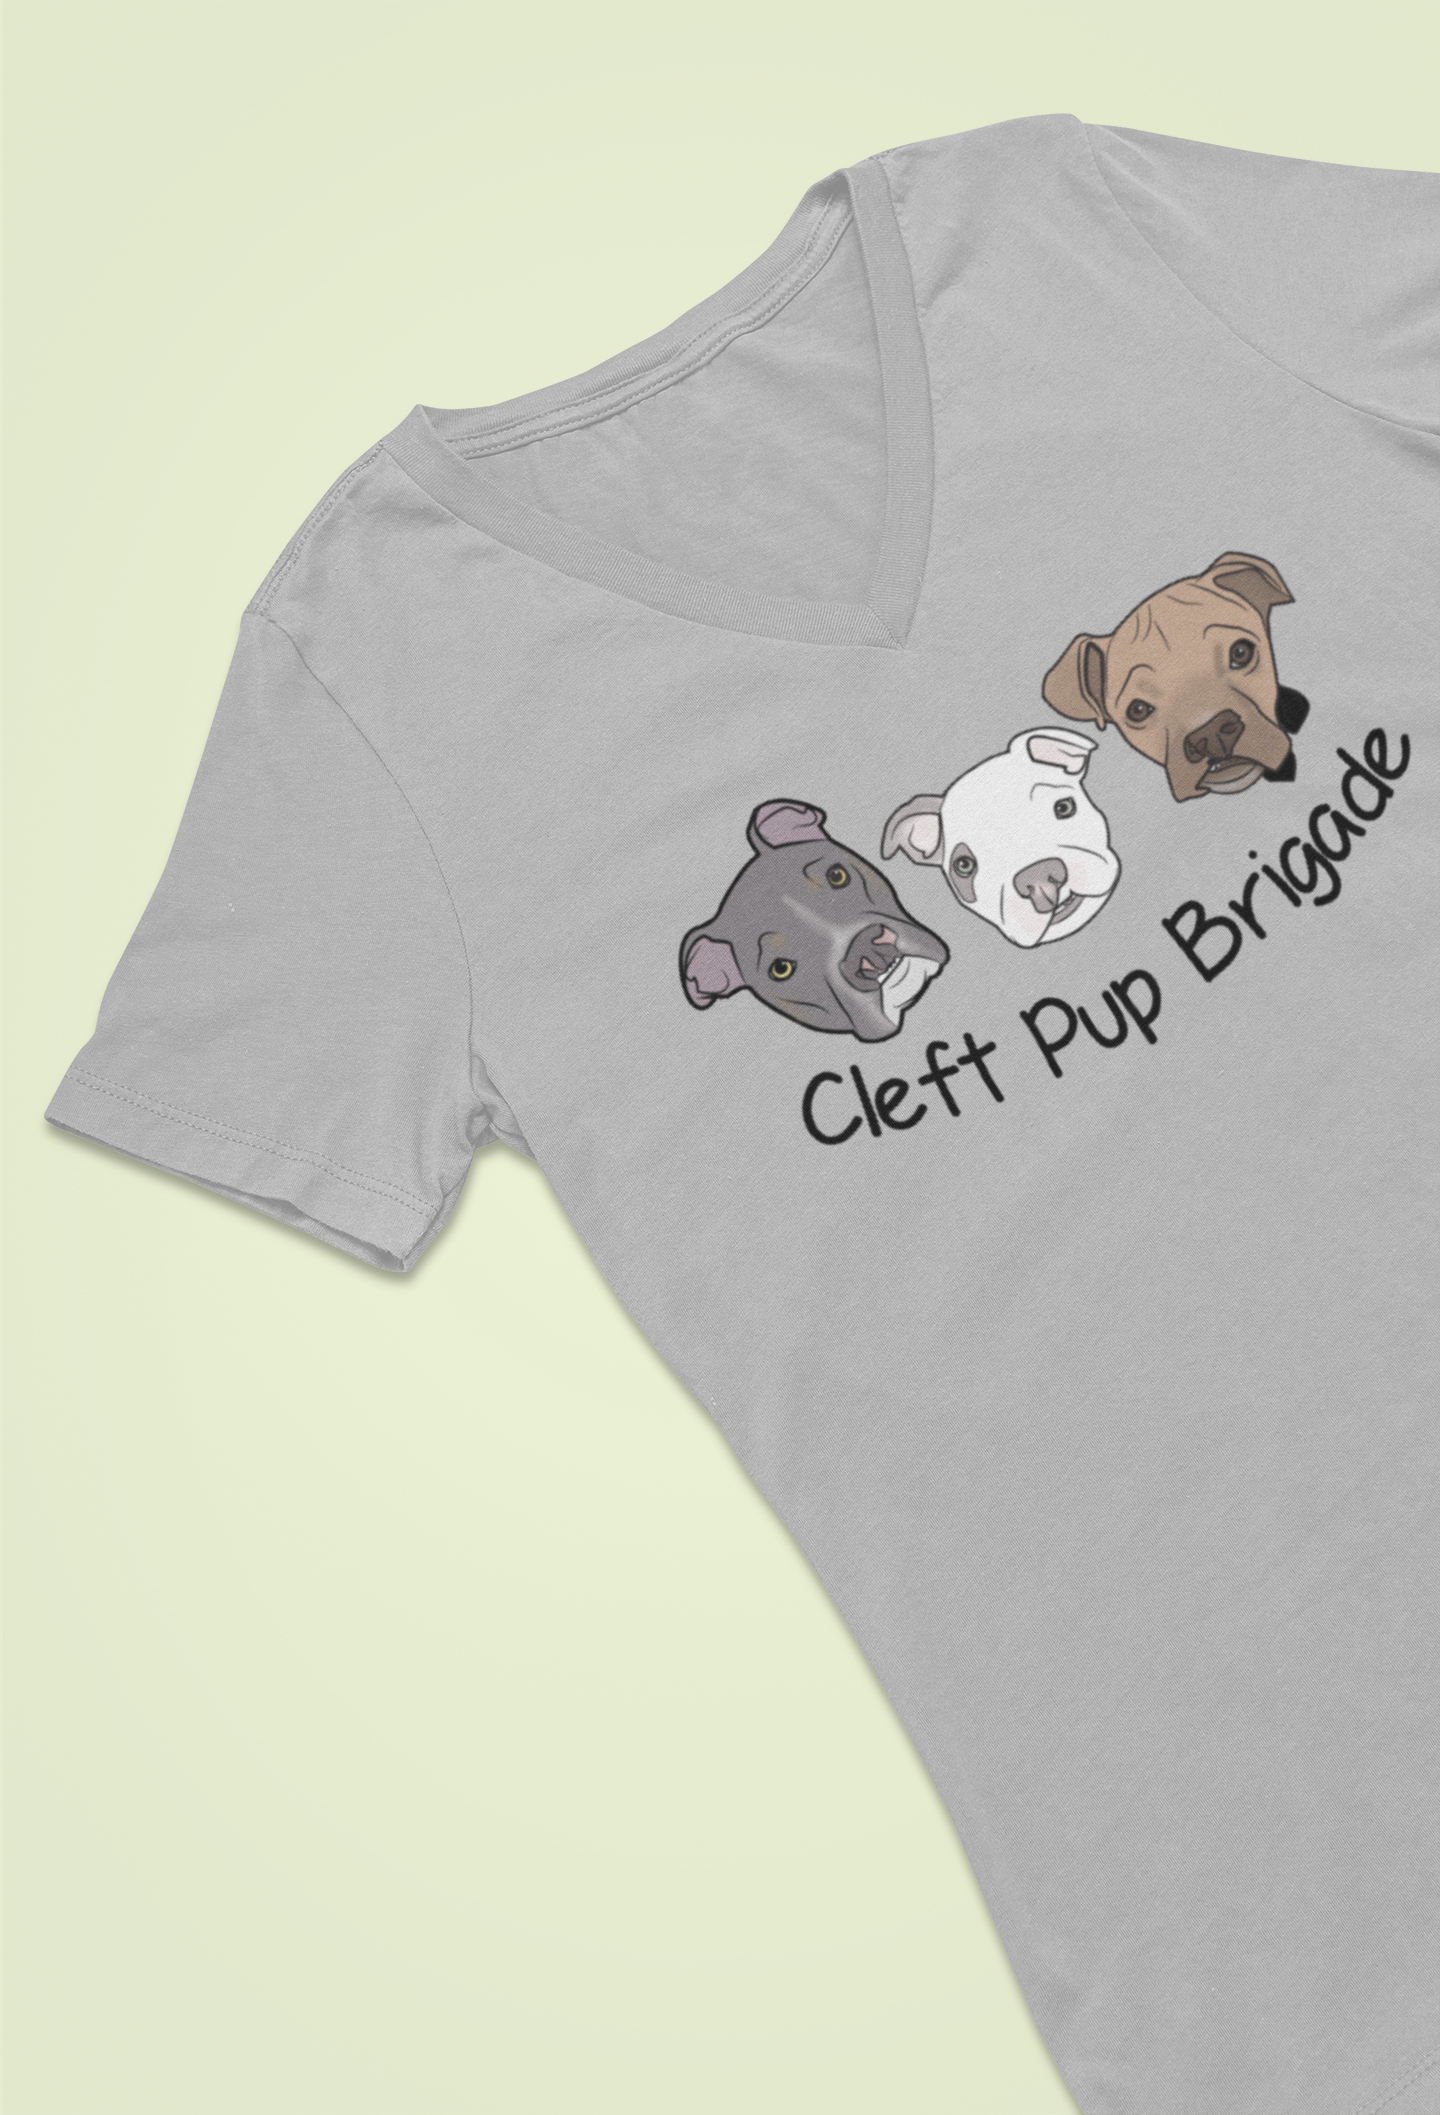 Cleft Pup Brigade V Neck (available in several colors)